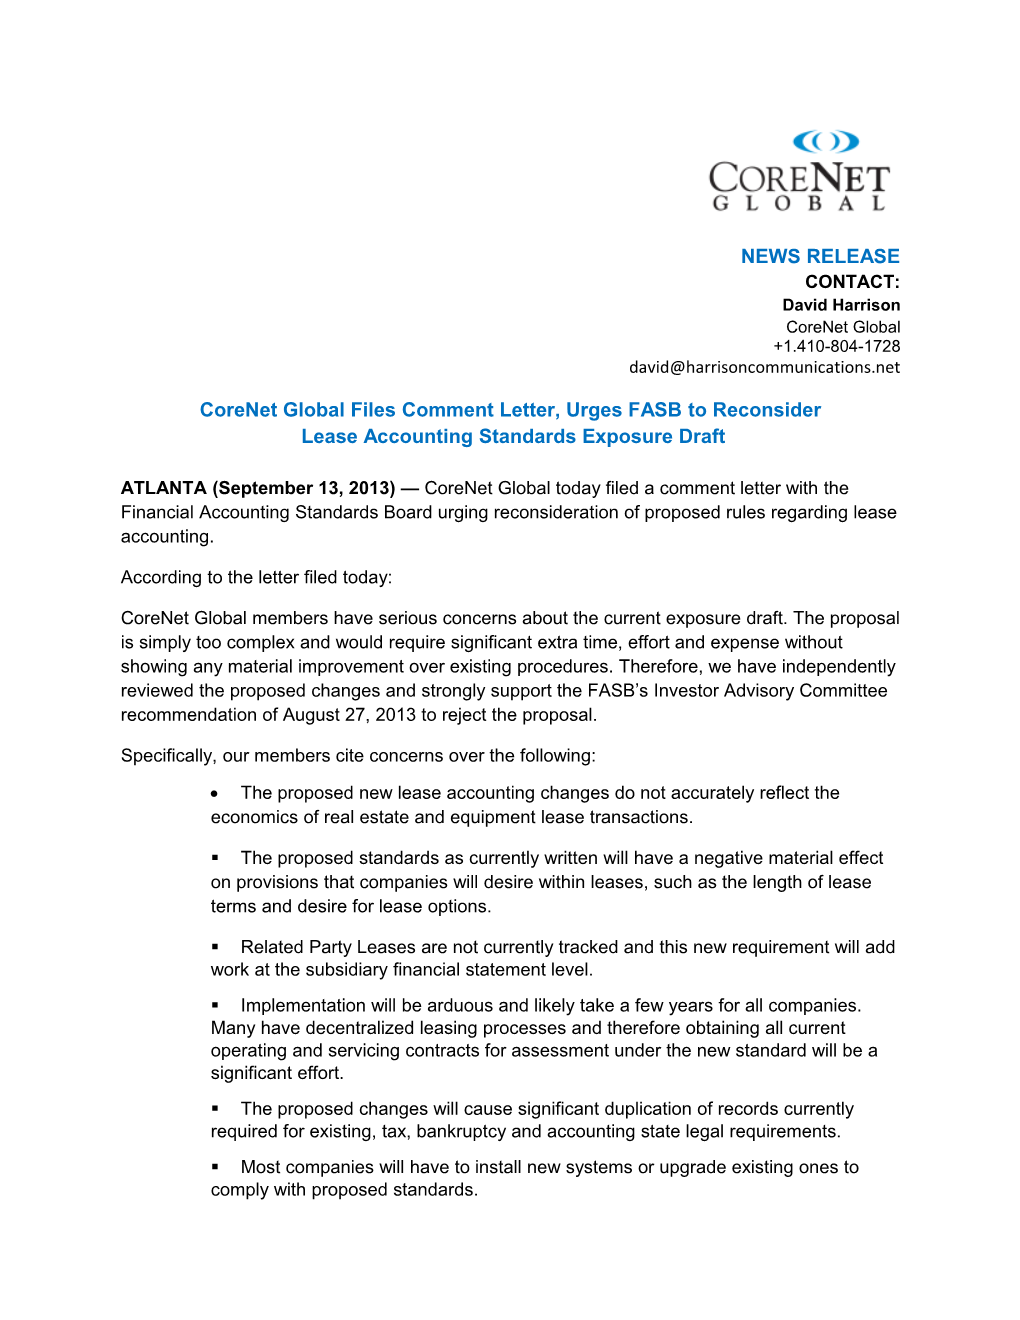 Corenet Global Files Comment Letter, Urges FASB to Reconsider